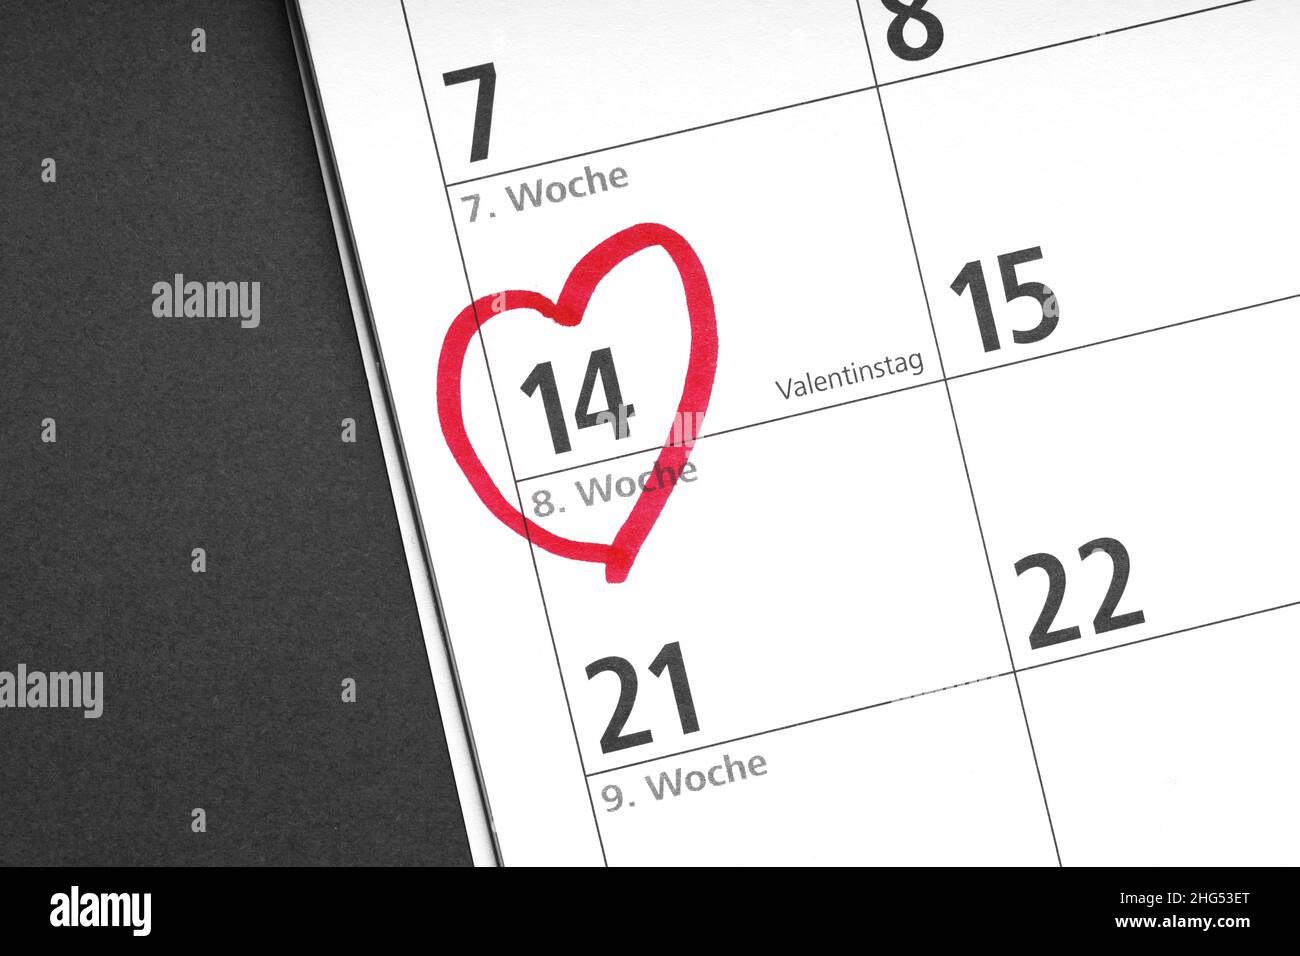 red heart marks february 14 as Valentinstag or Valentine's day on german calendar Stock Photo